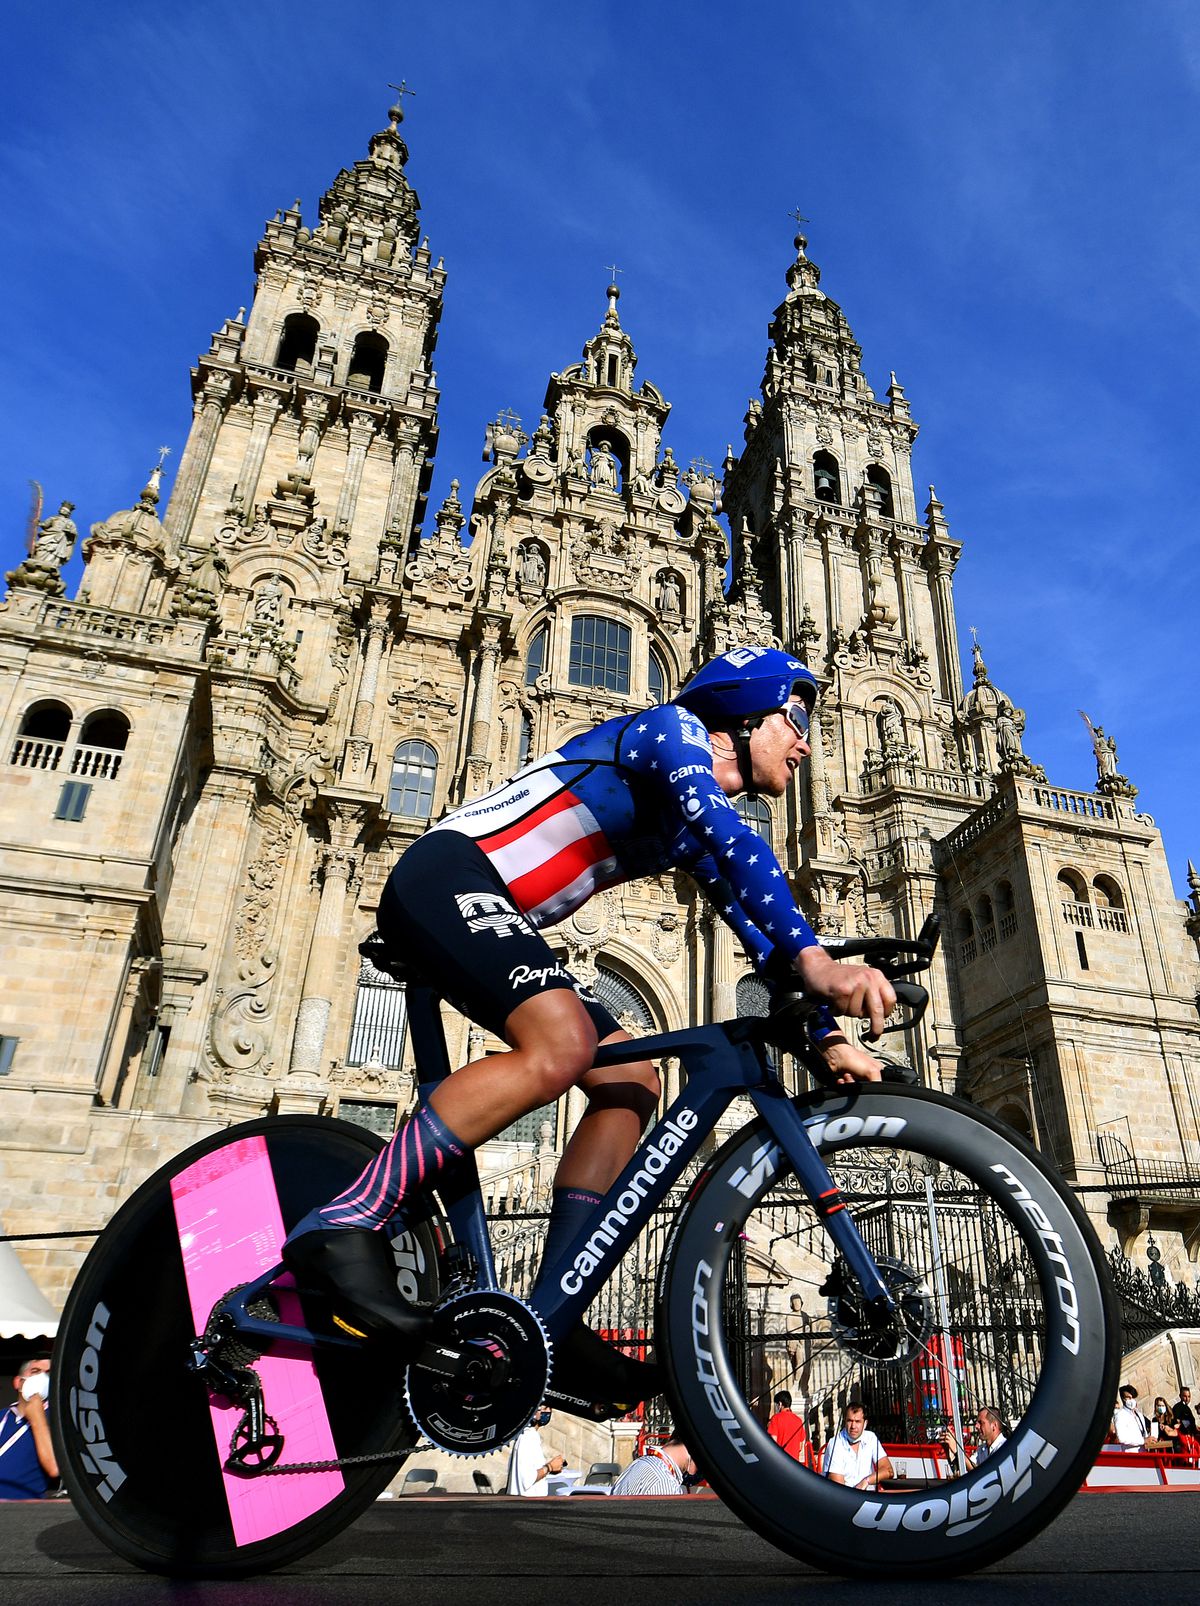 76th Tour of Spain 2021 - Stage 21